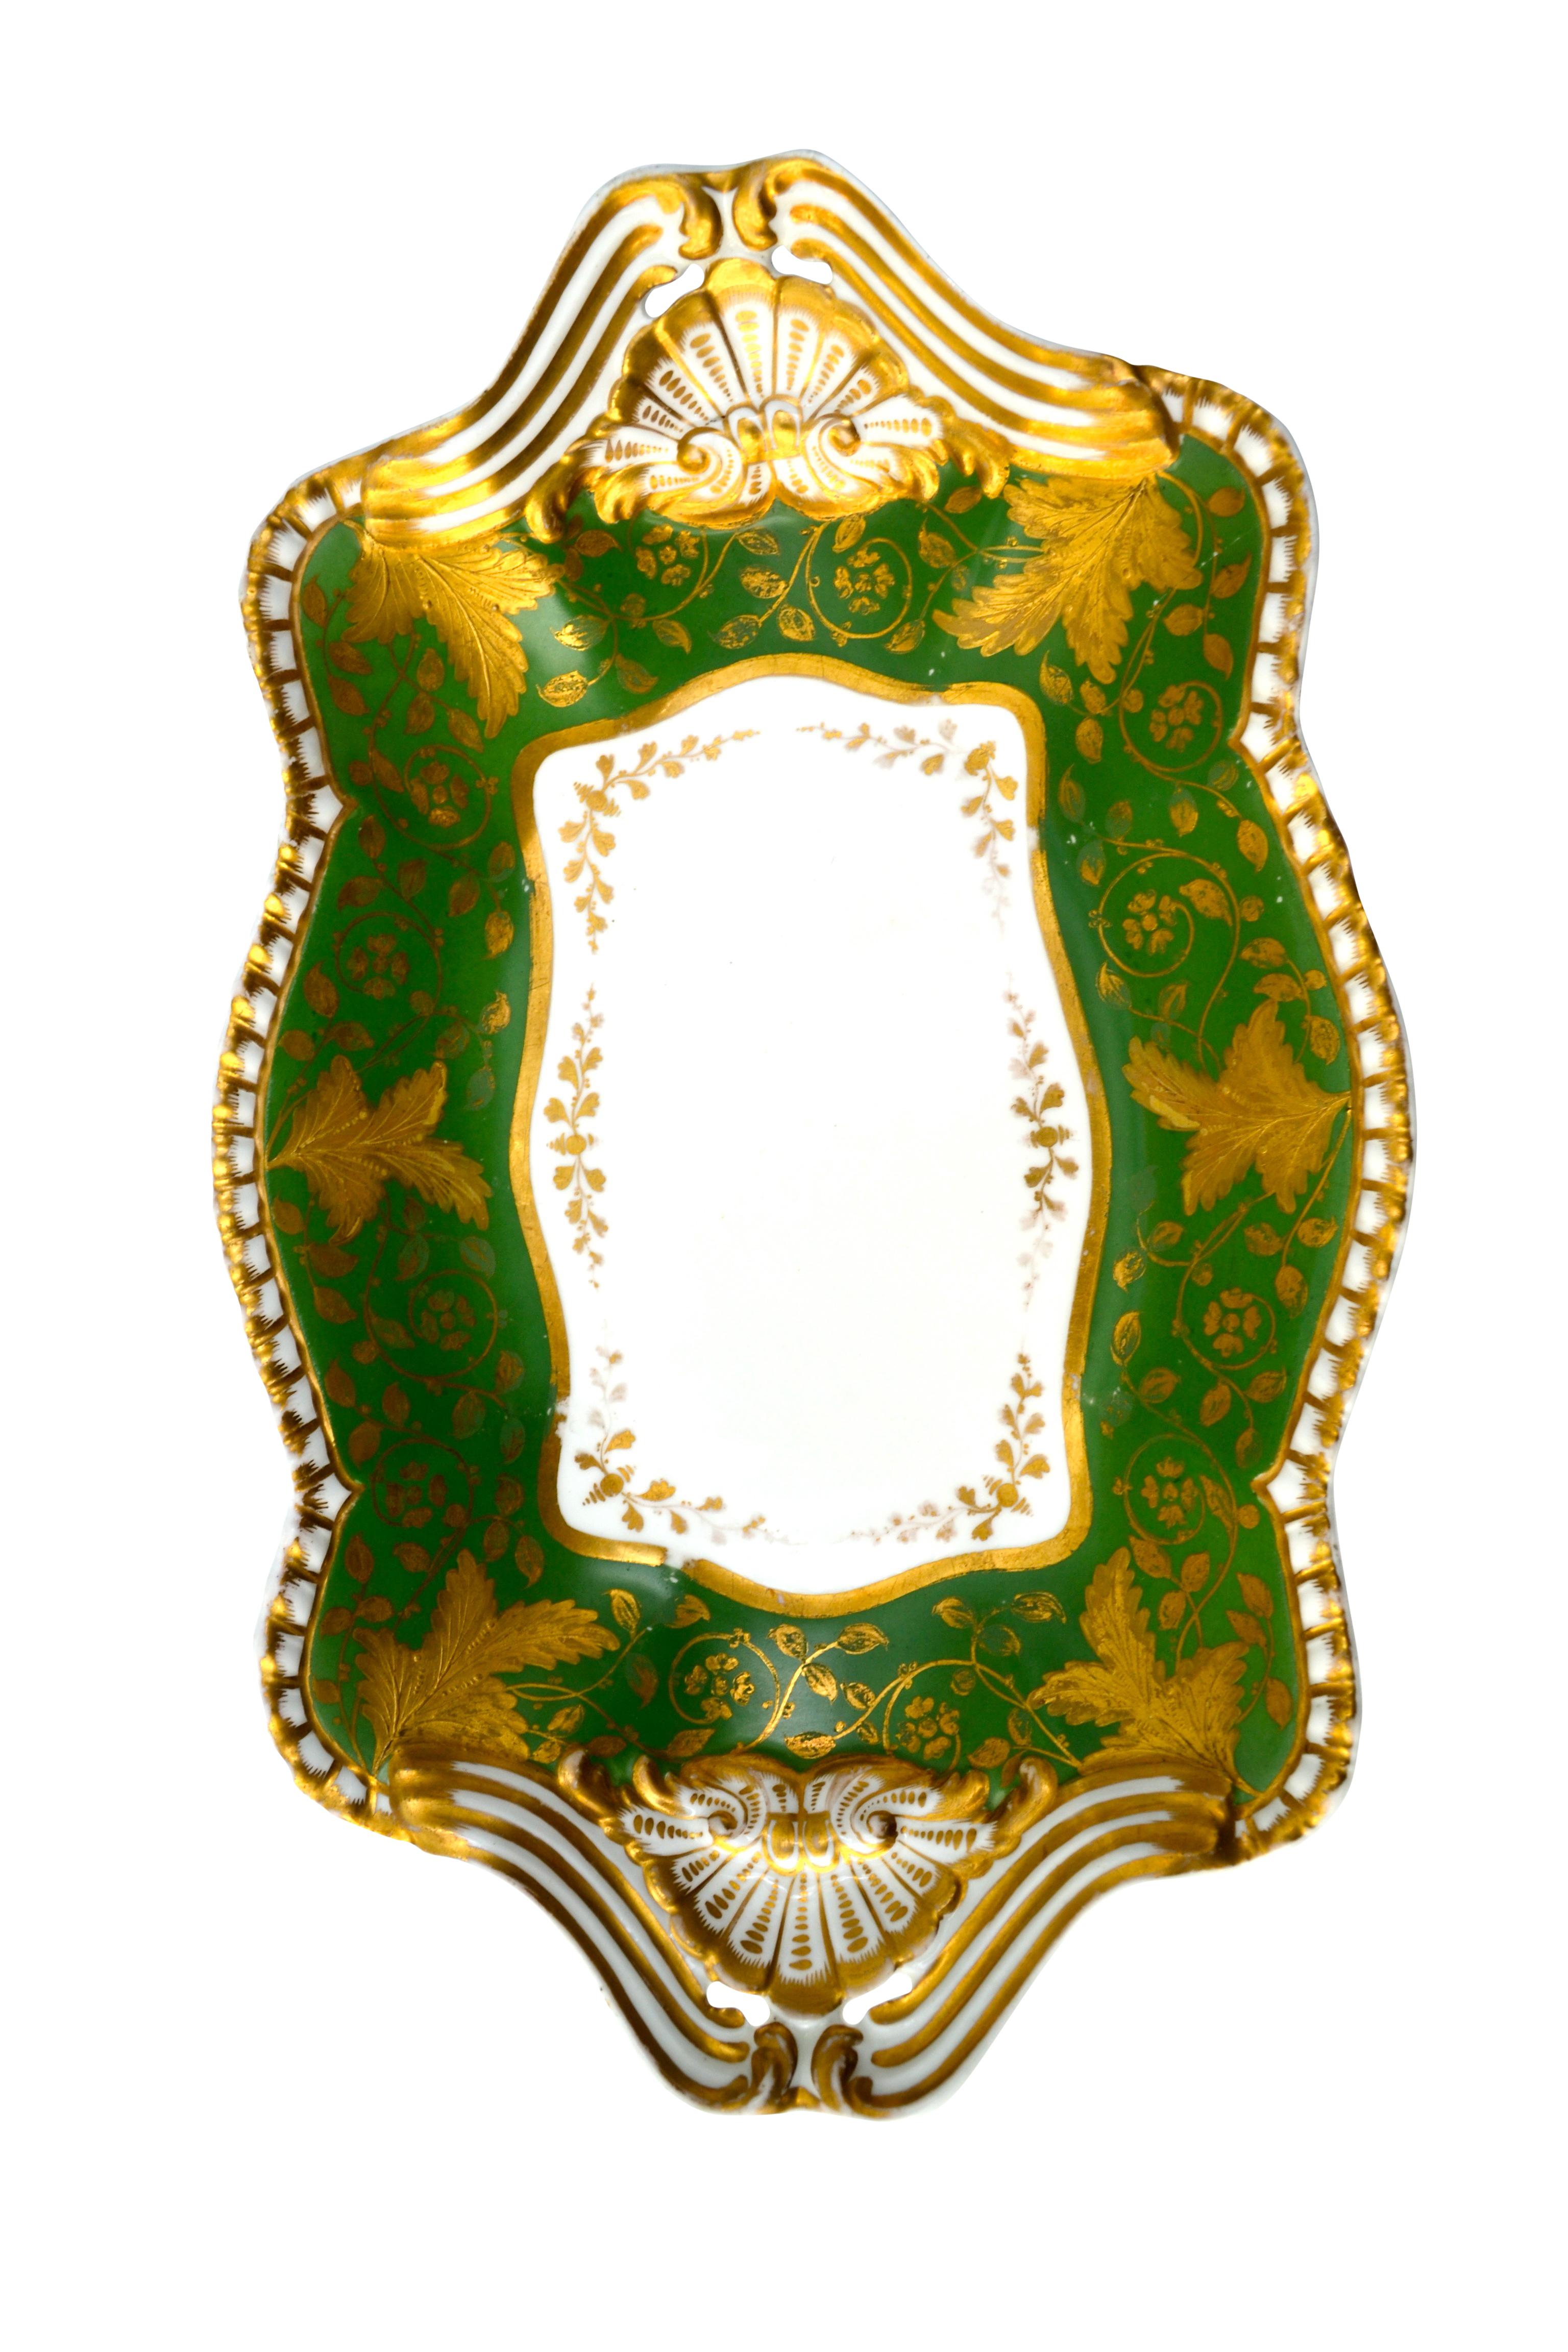 19th Century Six Georgian Spode Felspar Porcelain Serving Dishes in White Green and Gold